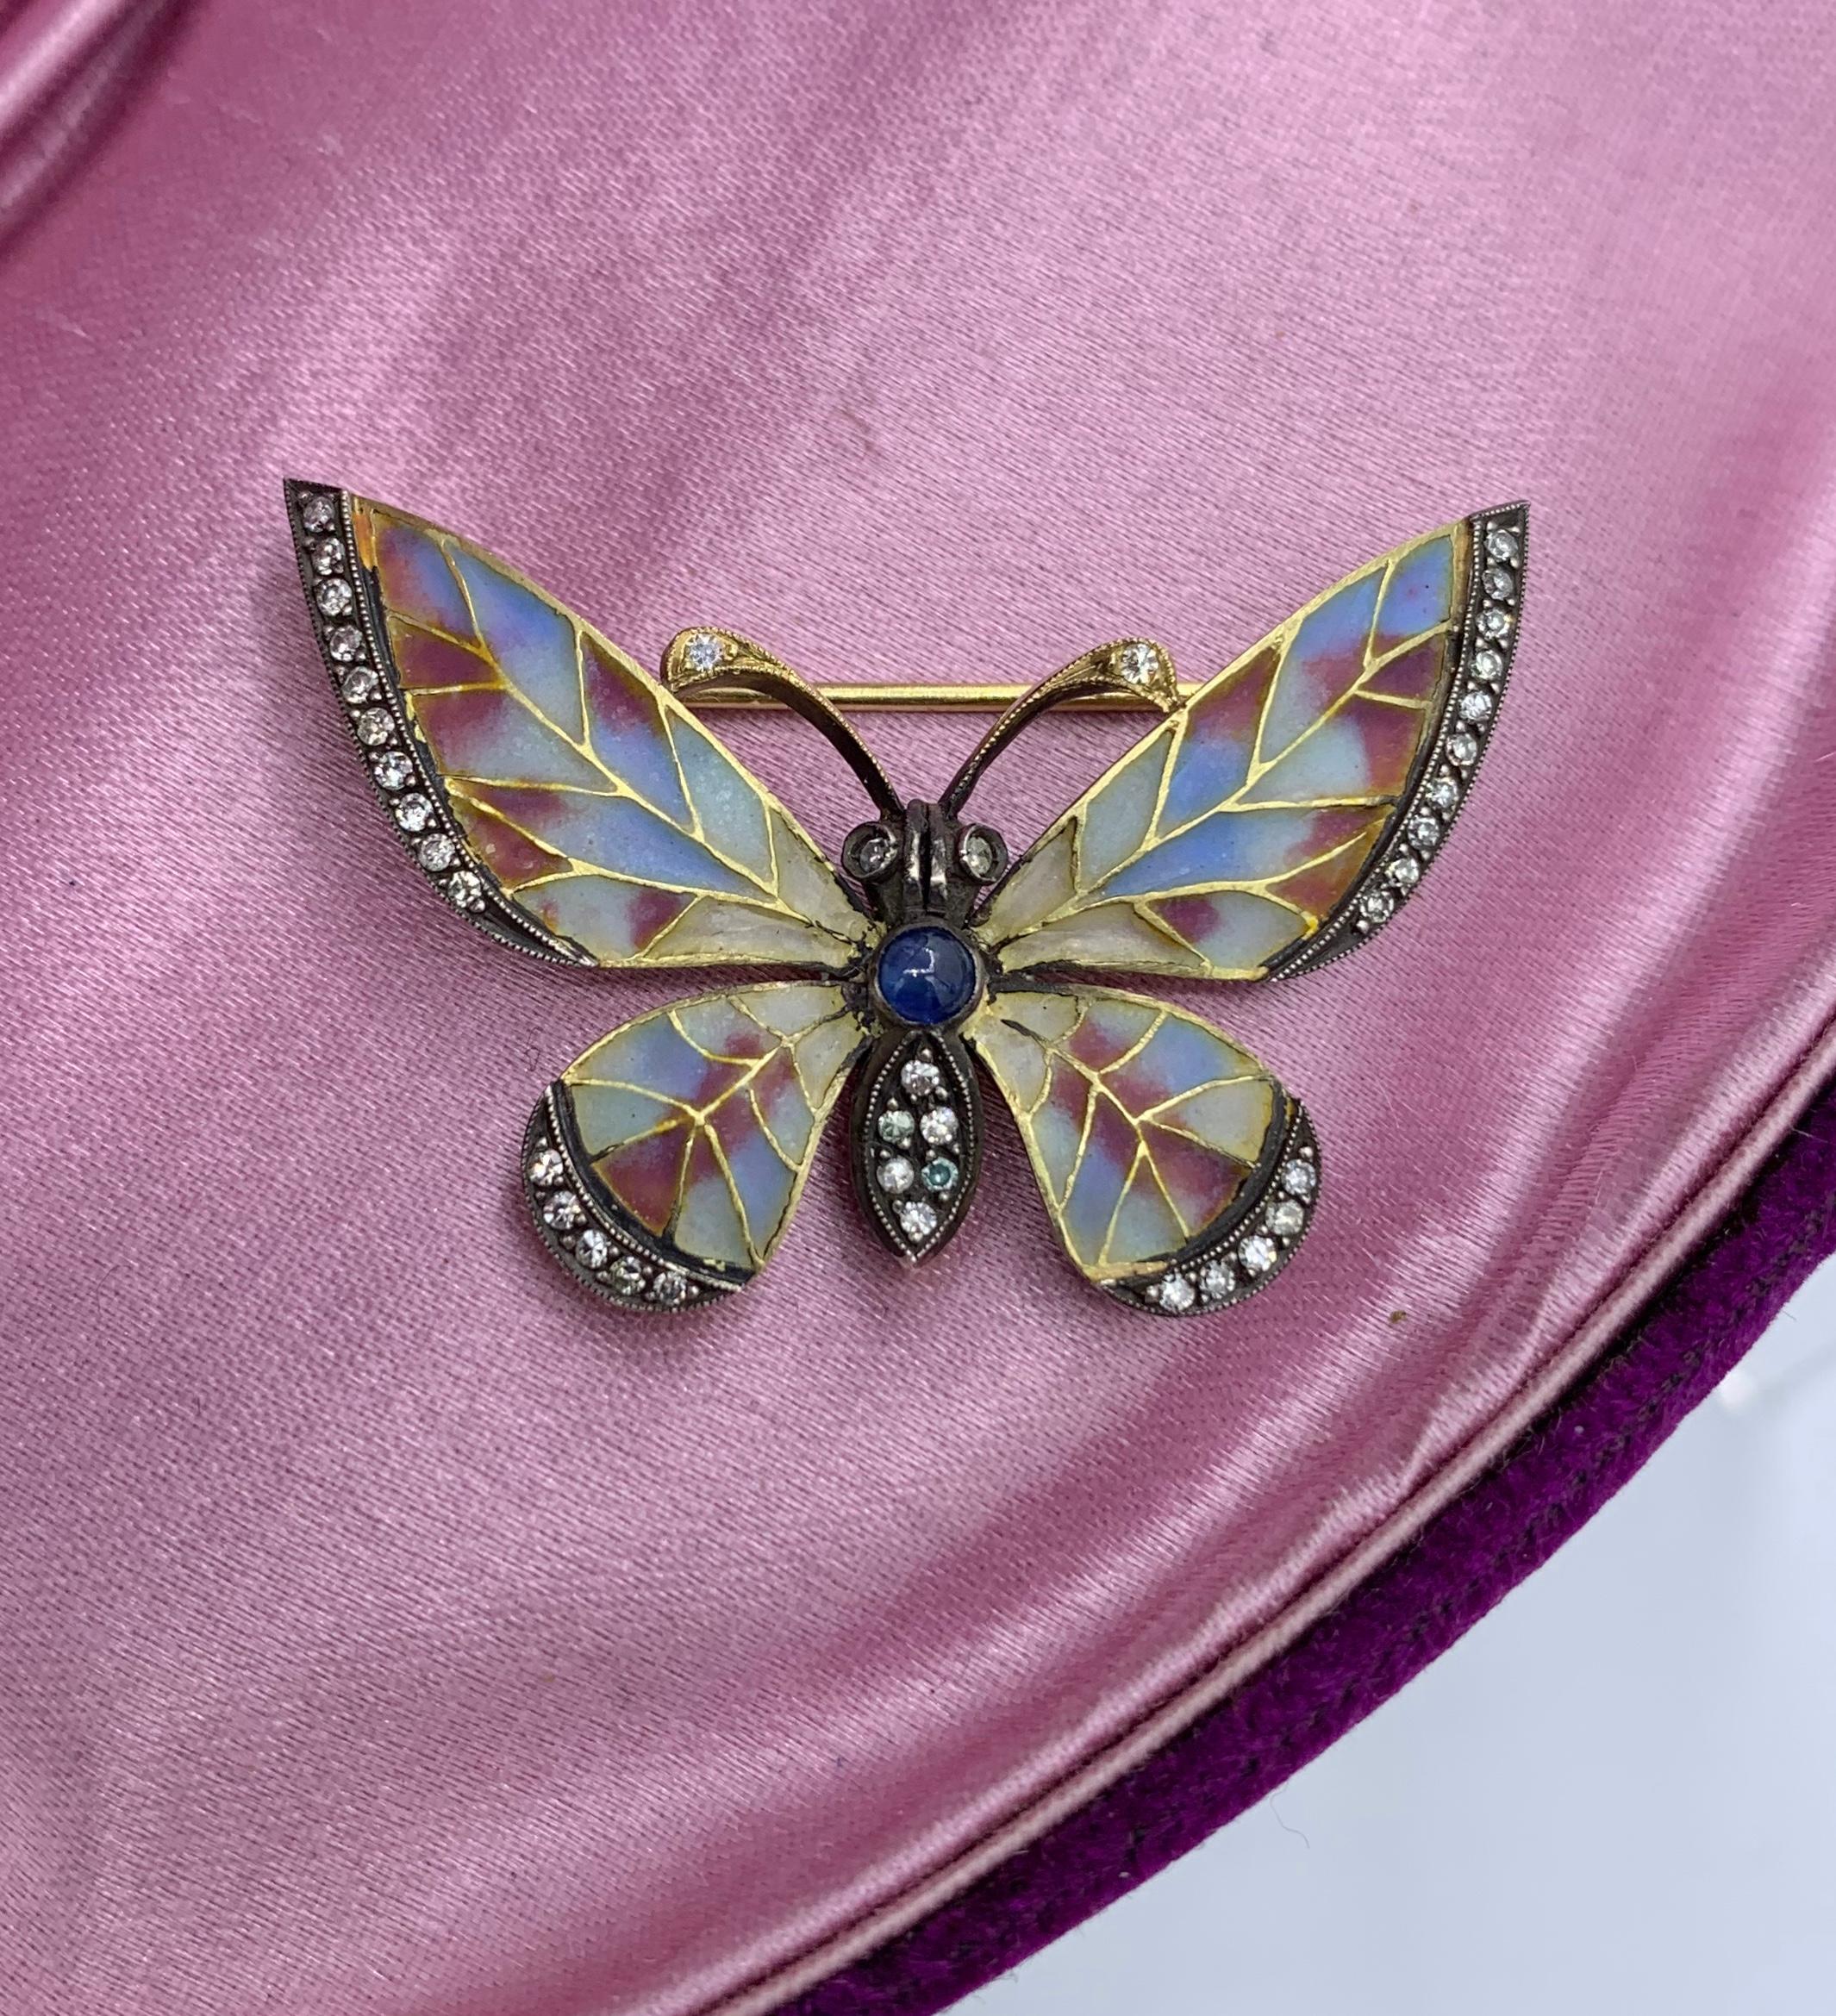 Plique-a-Jour Enamel Sapphire Diamond Butterfly Brooch Art Nouveau 18 Karat Gold In Excellent Condition For Sale In New York, NY